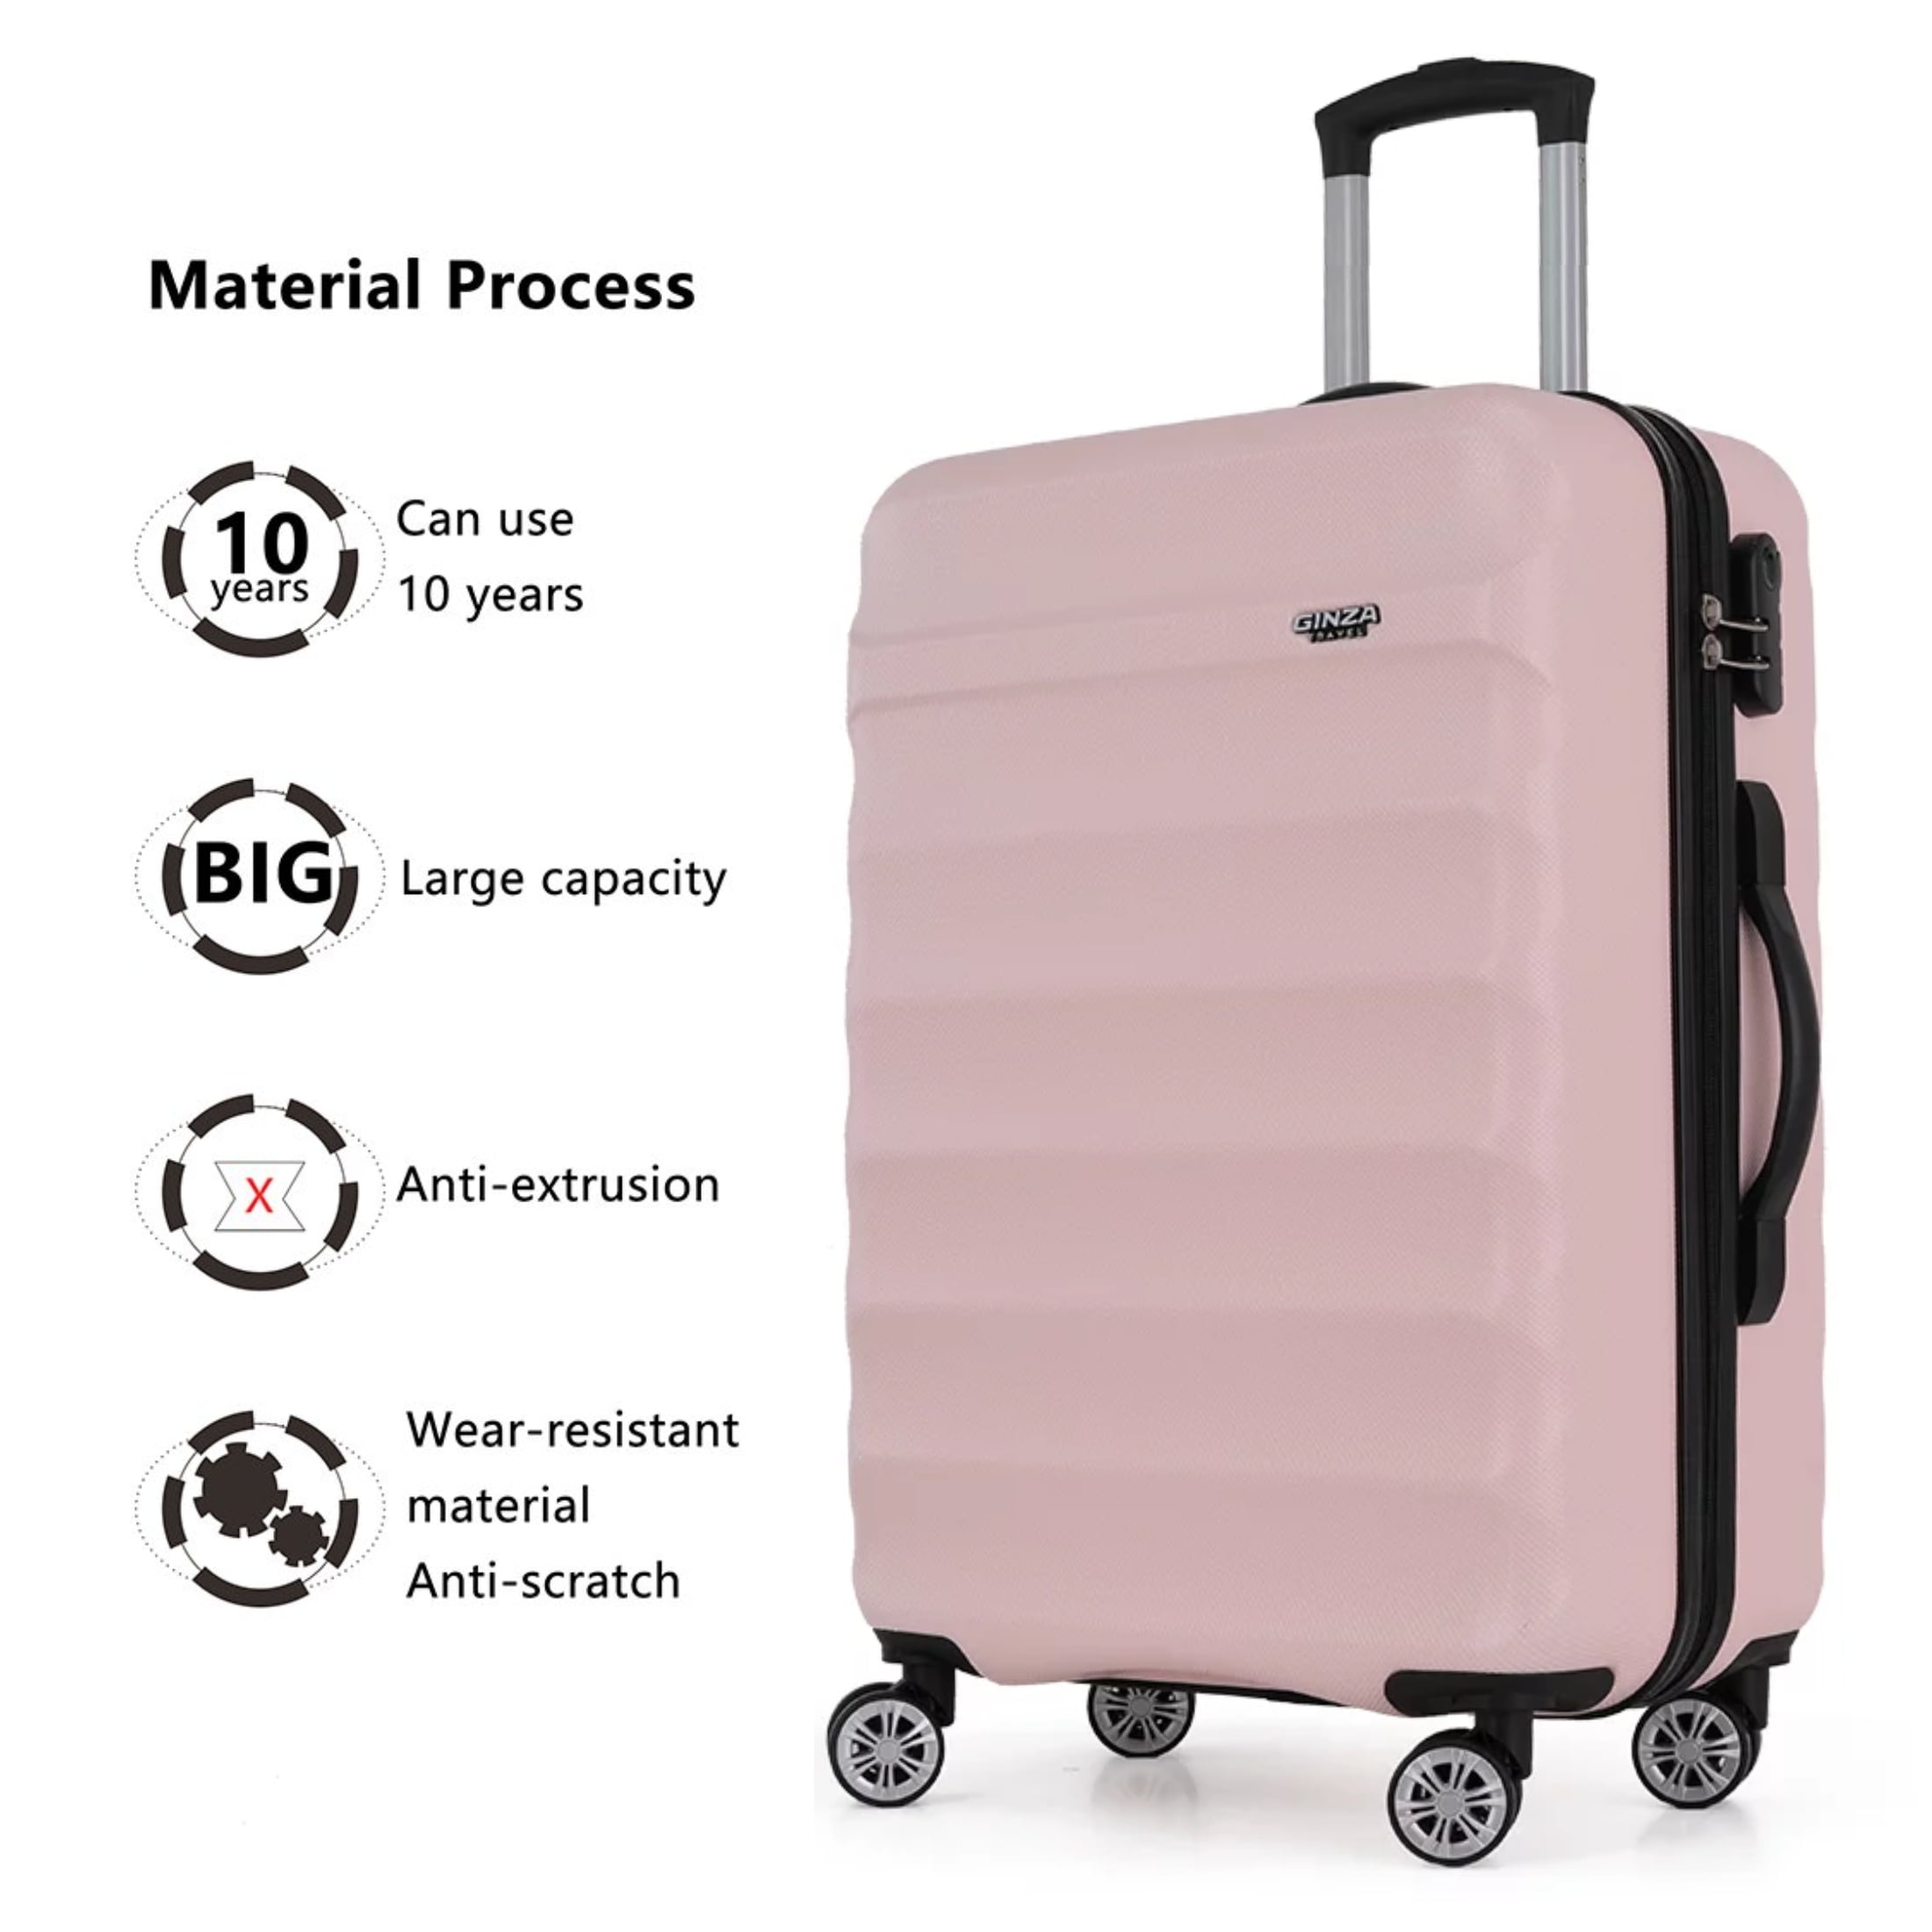 zuigen Oefening Adolescent Ginza Travel 3 Piece Luggage Set,Hard Suitcase Set with Spinner Wheels  Travel Luggage Set for Airplane,Light Pink - Walmart.com